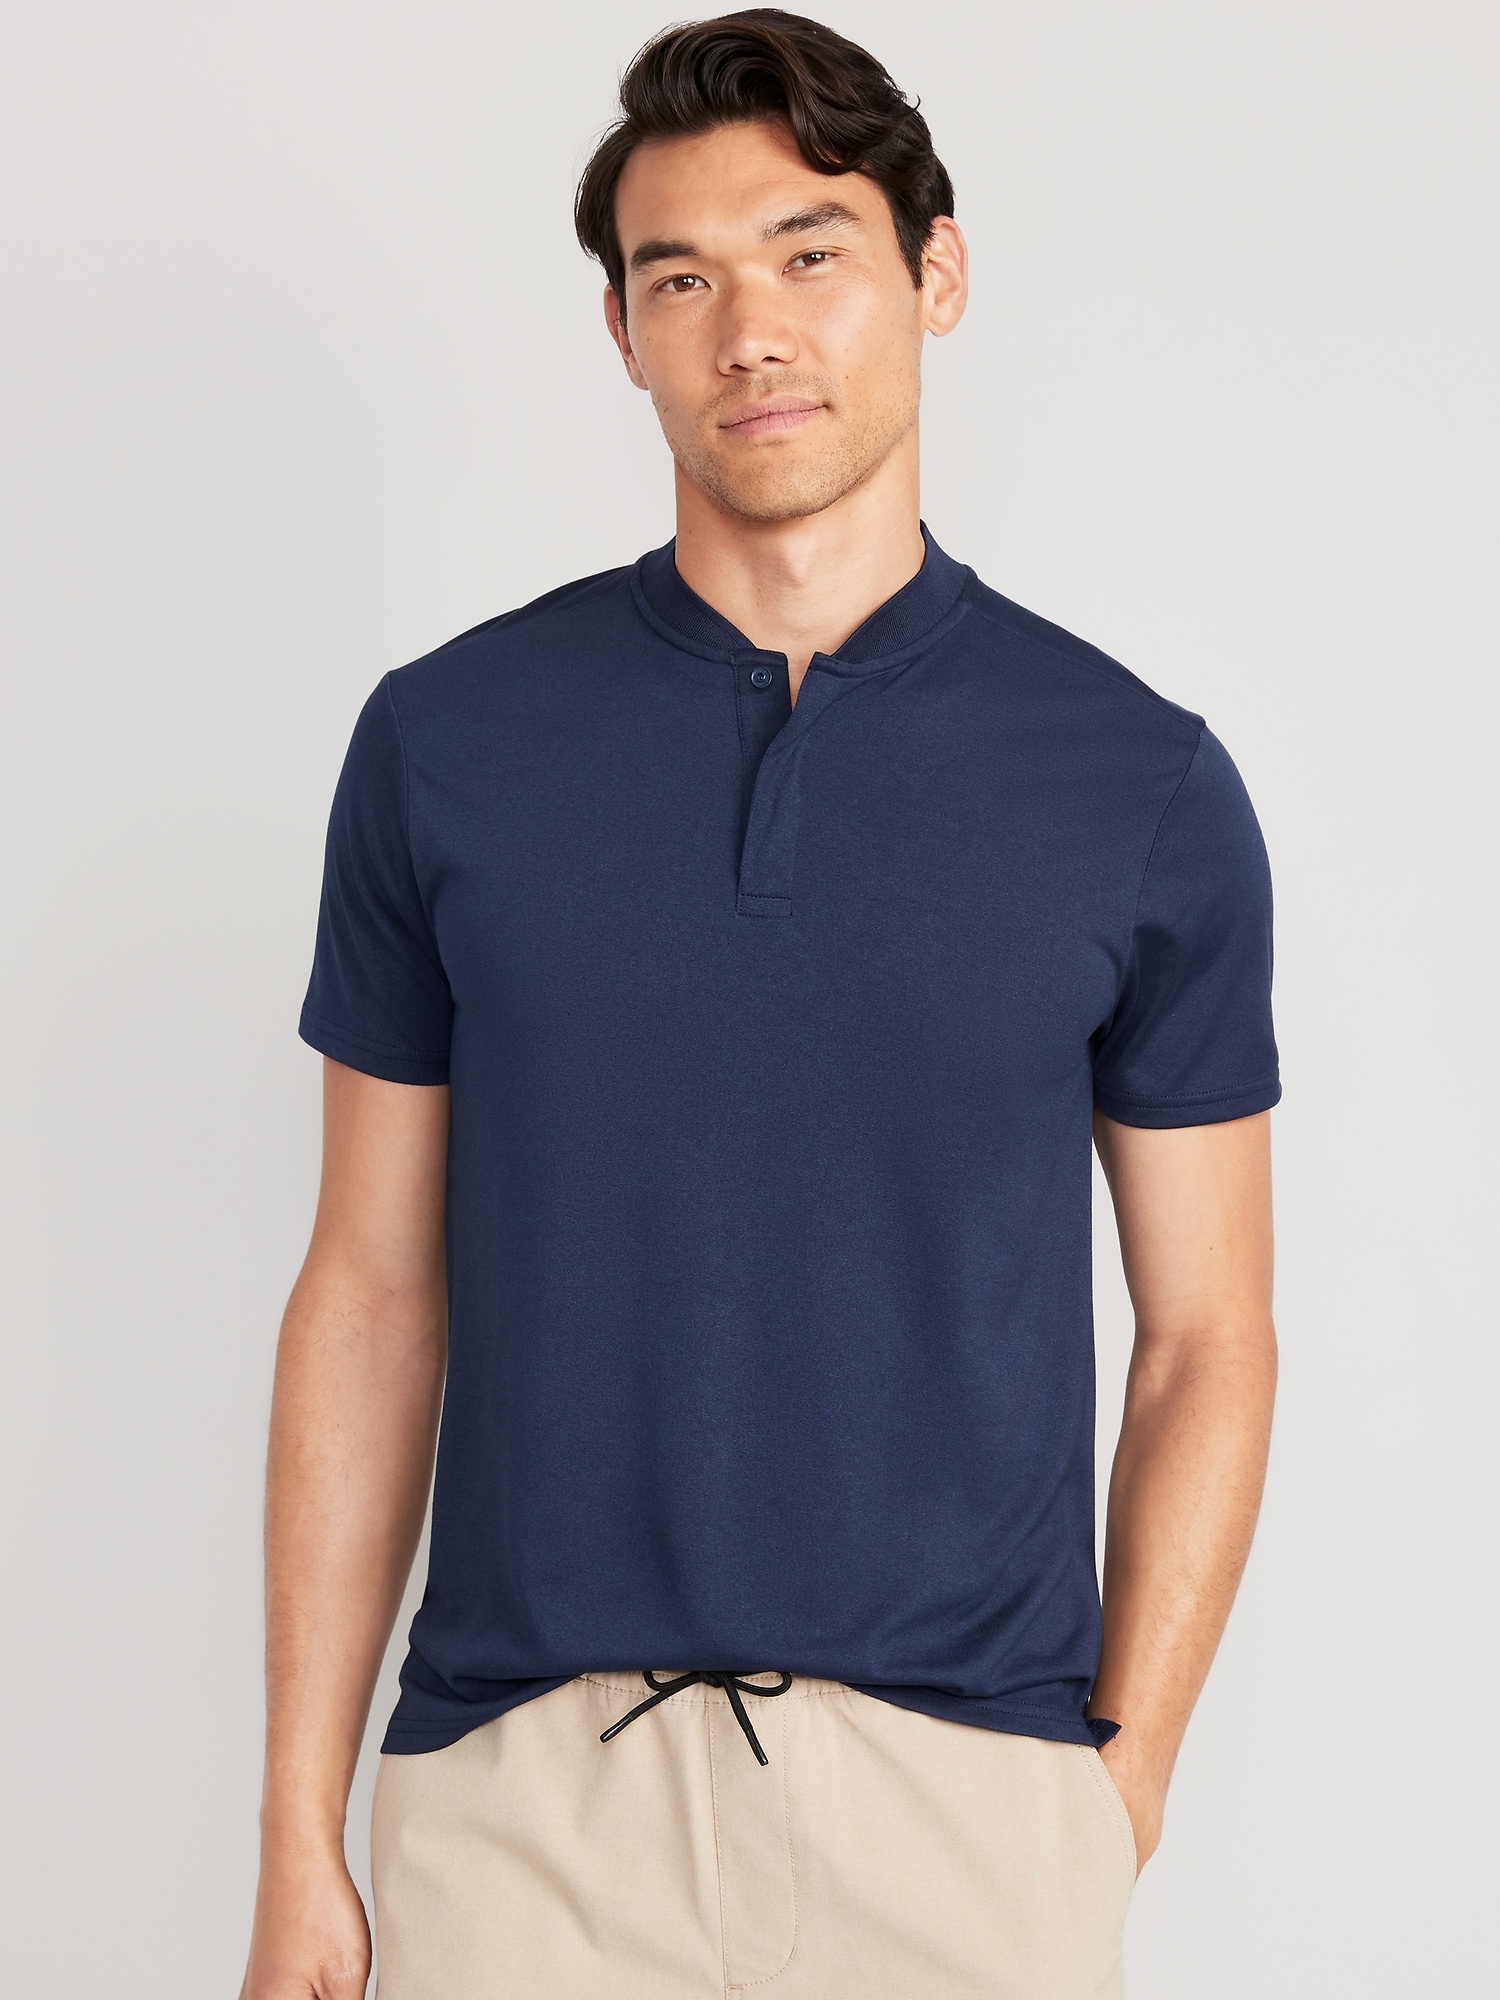 Old Navy Performance Core Banded-Collar Polo for Men blue. 1